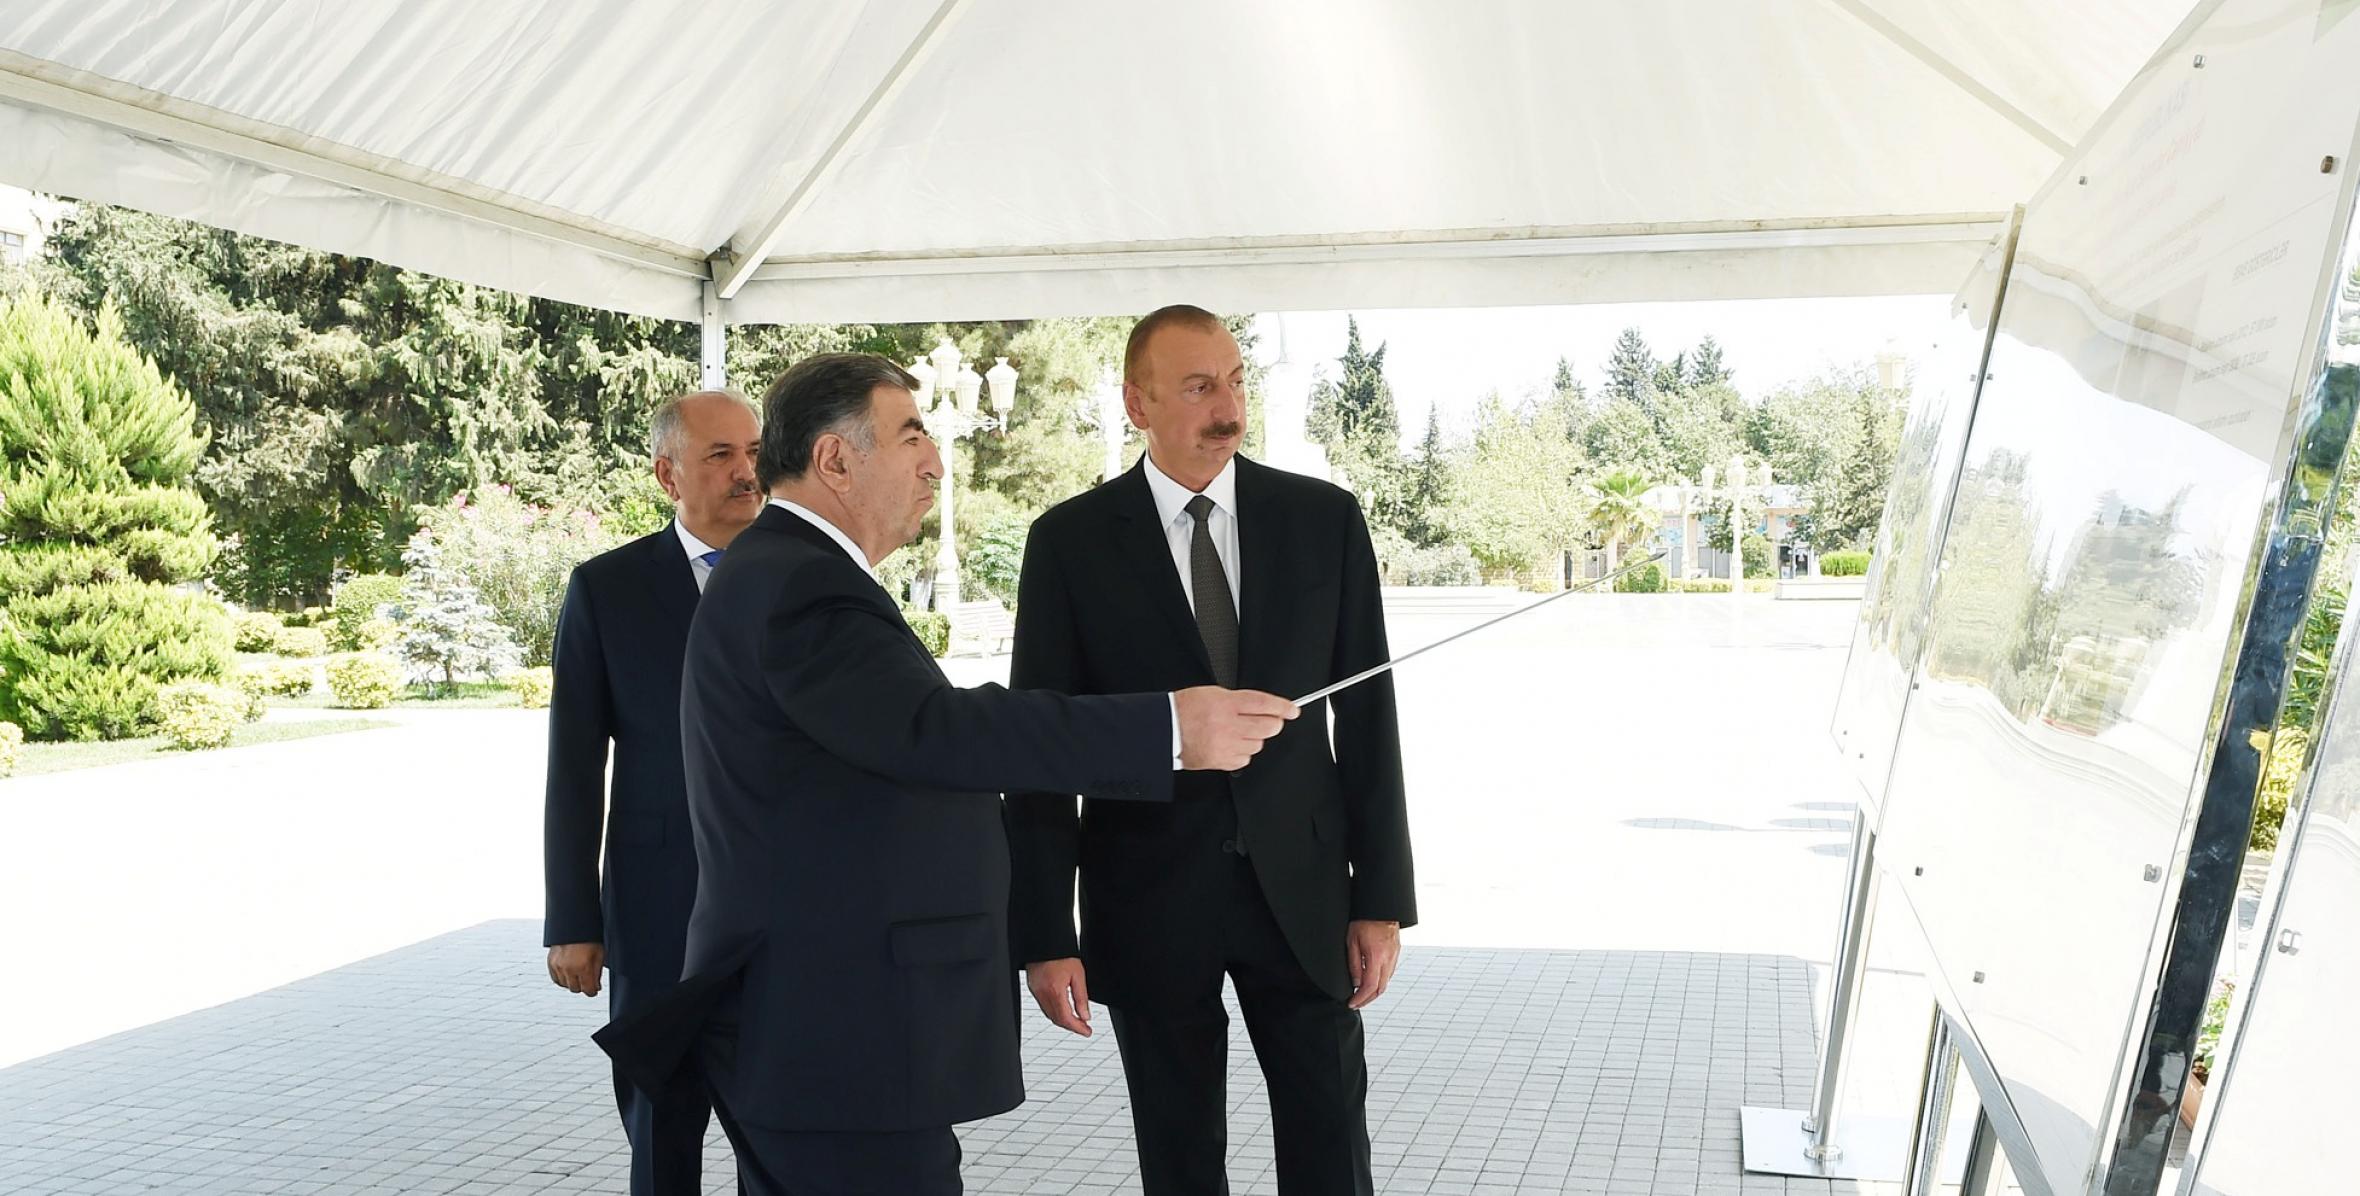 Ilham Aliyev has attended the launch of water supply and sewage systems in the city of Jalilabad